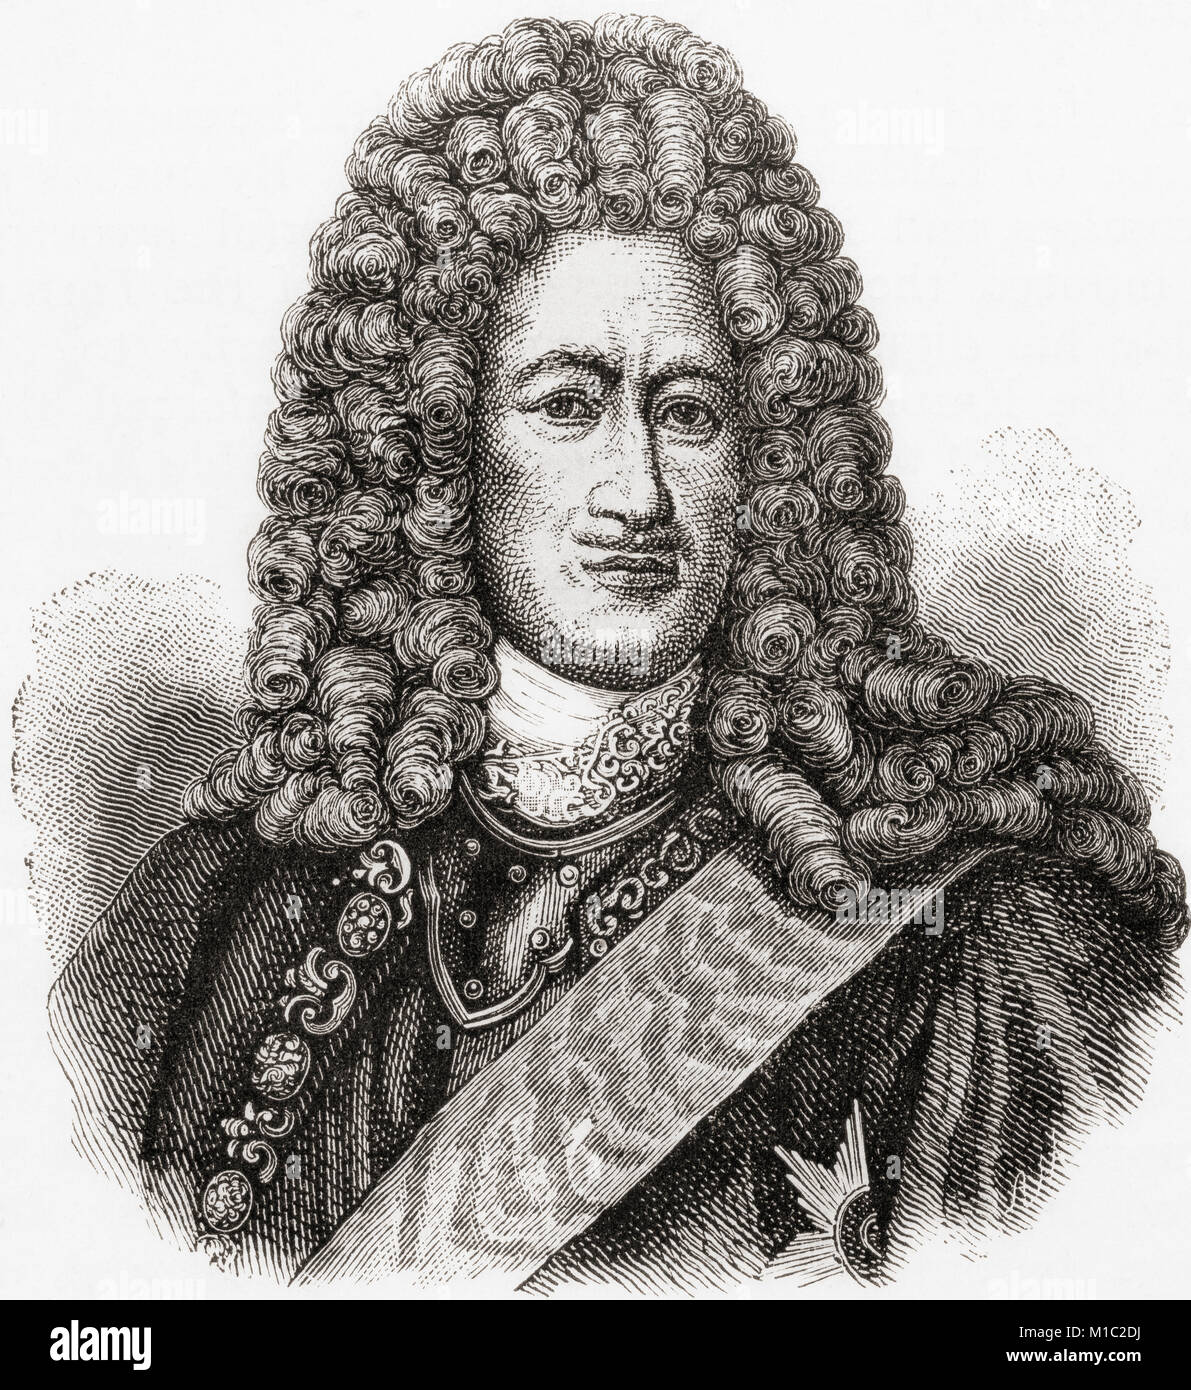 Prince Alexander Danilovich Menshikov, 1673 – 1729.  Russian statesman, Generalissimo of Russian Imperial Army, Admiral of Russian Imperial Navy, Prince of the Russian Empire, Duke of Izhora (Duke of Ingria), Prince of the Holy Roman Empire and Duke of Cosel.  From Ward and Lock's Illustrated History of the World, published c.1882. Stock Photo